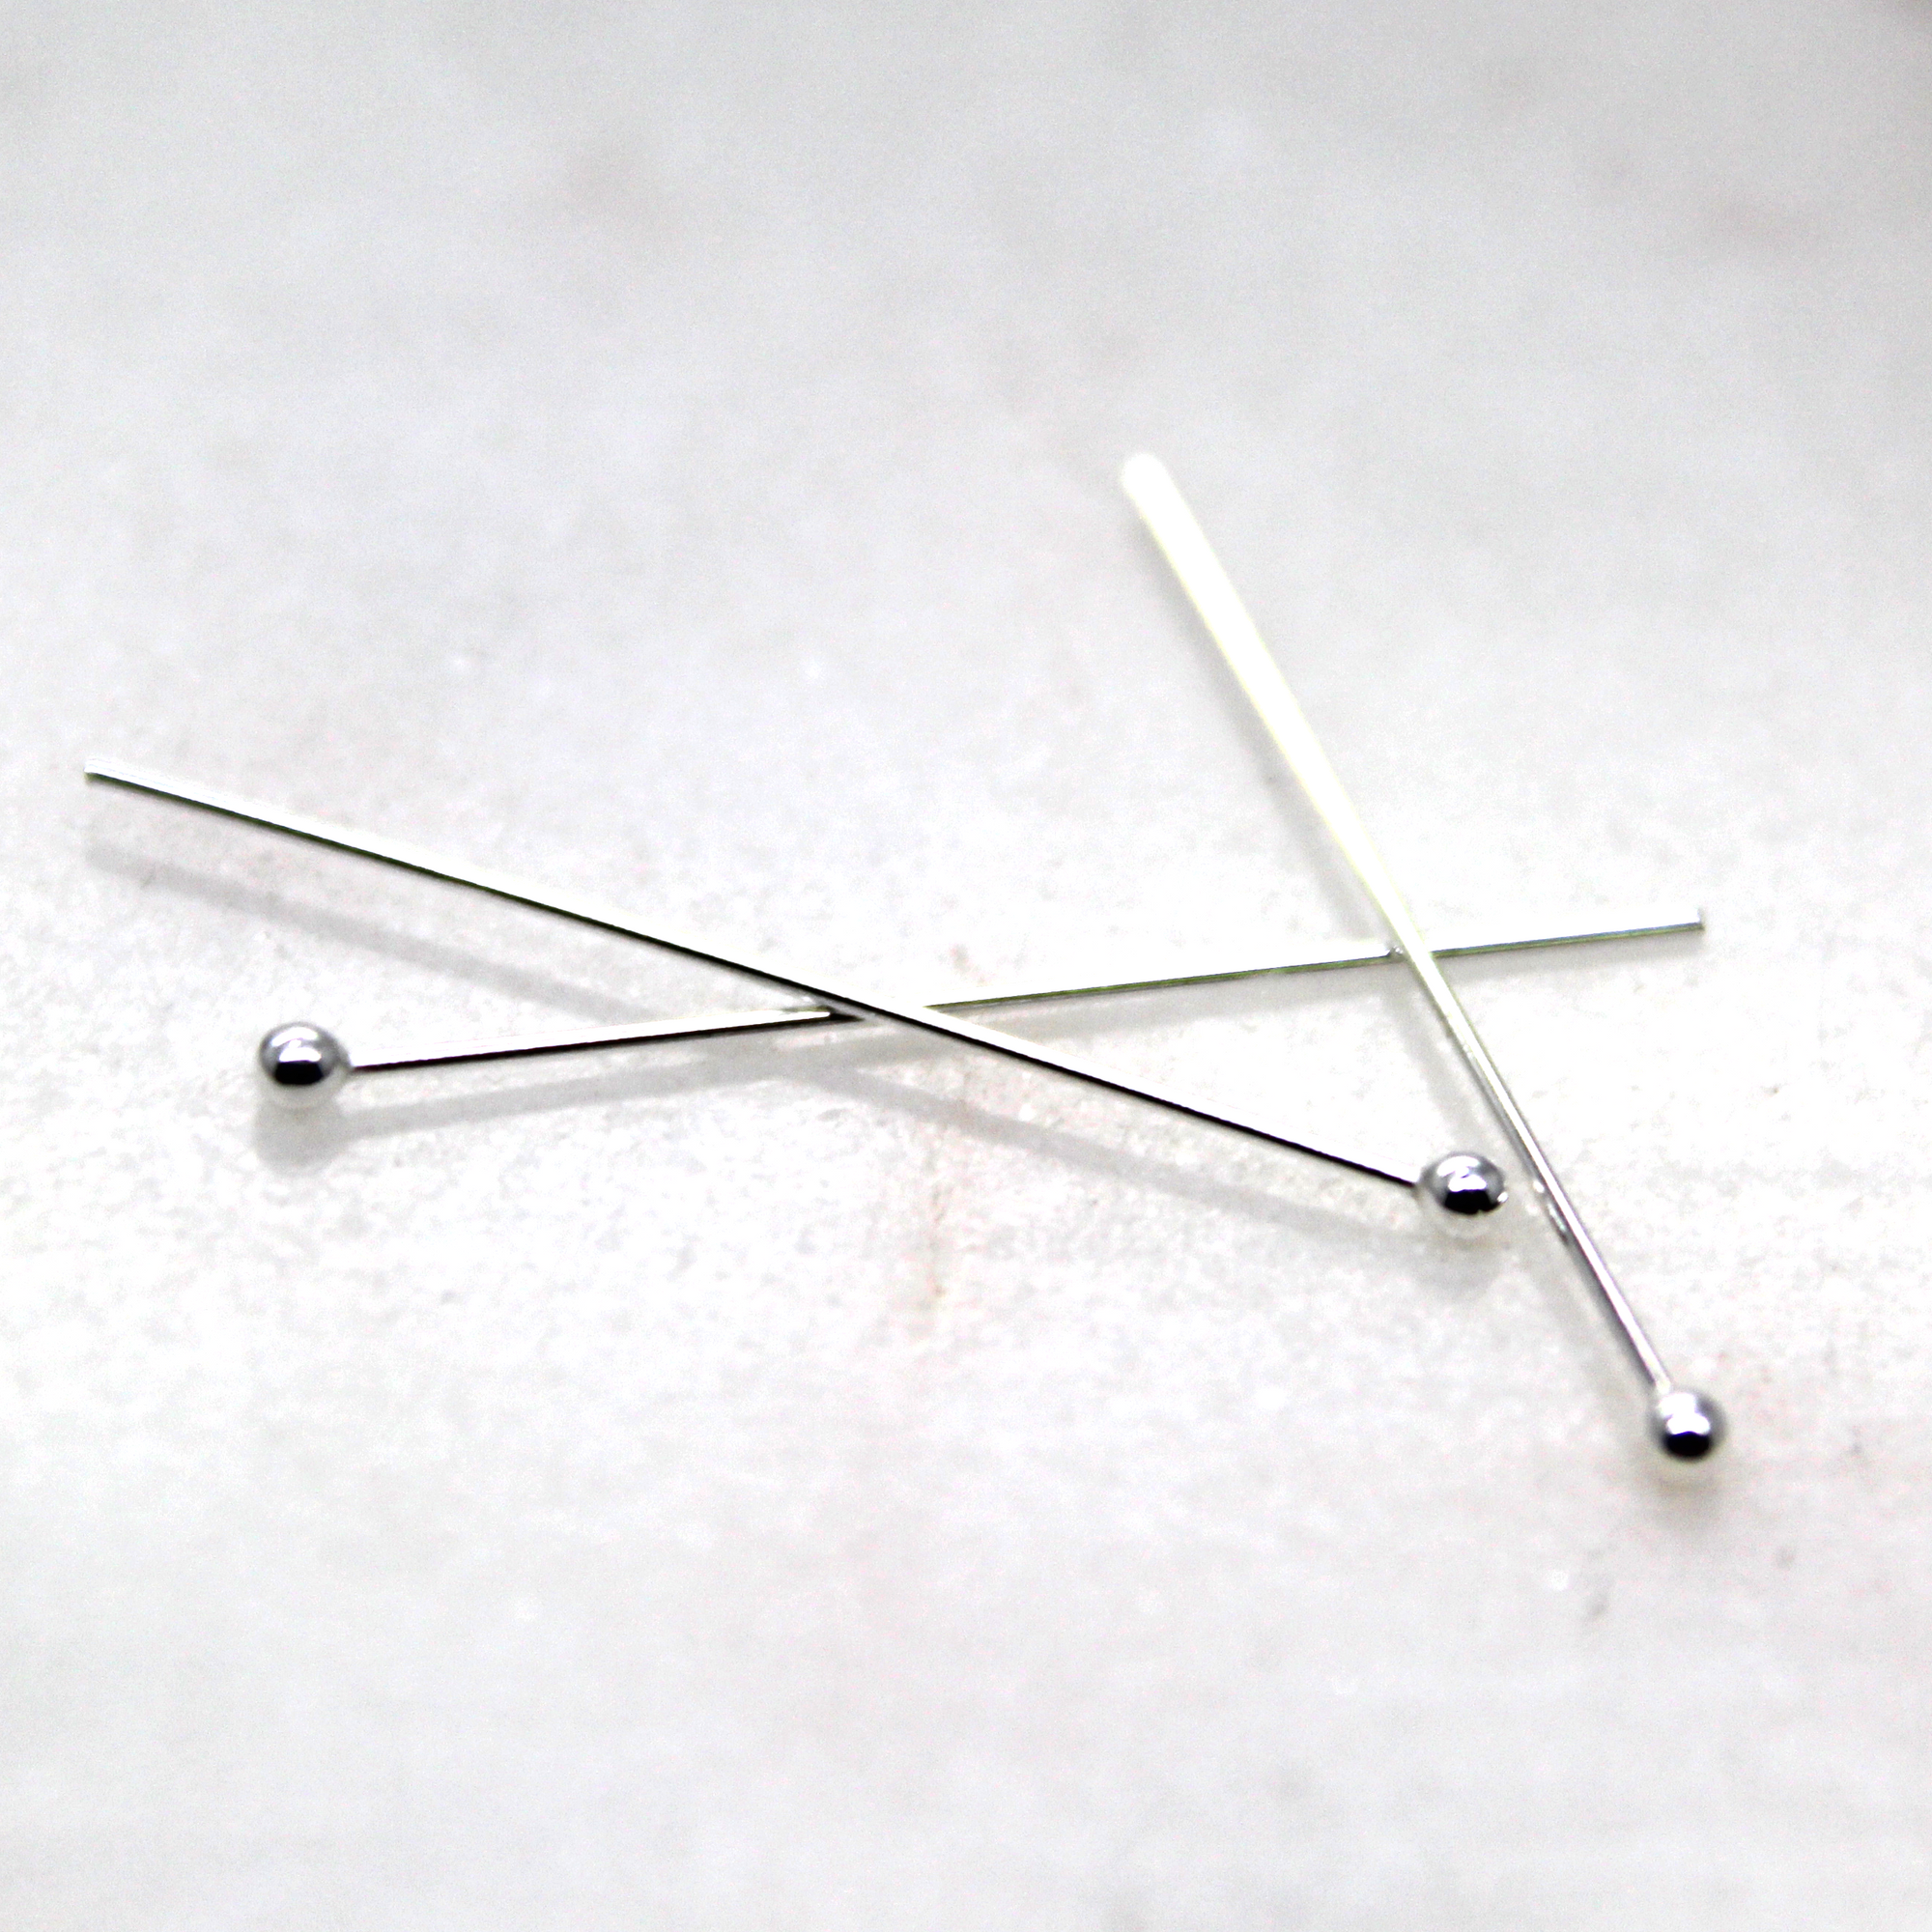 Ball Head Pin, Sterling Silver, 1.5 inches, 24 Gauge, 4pc